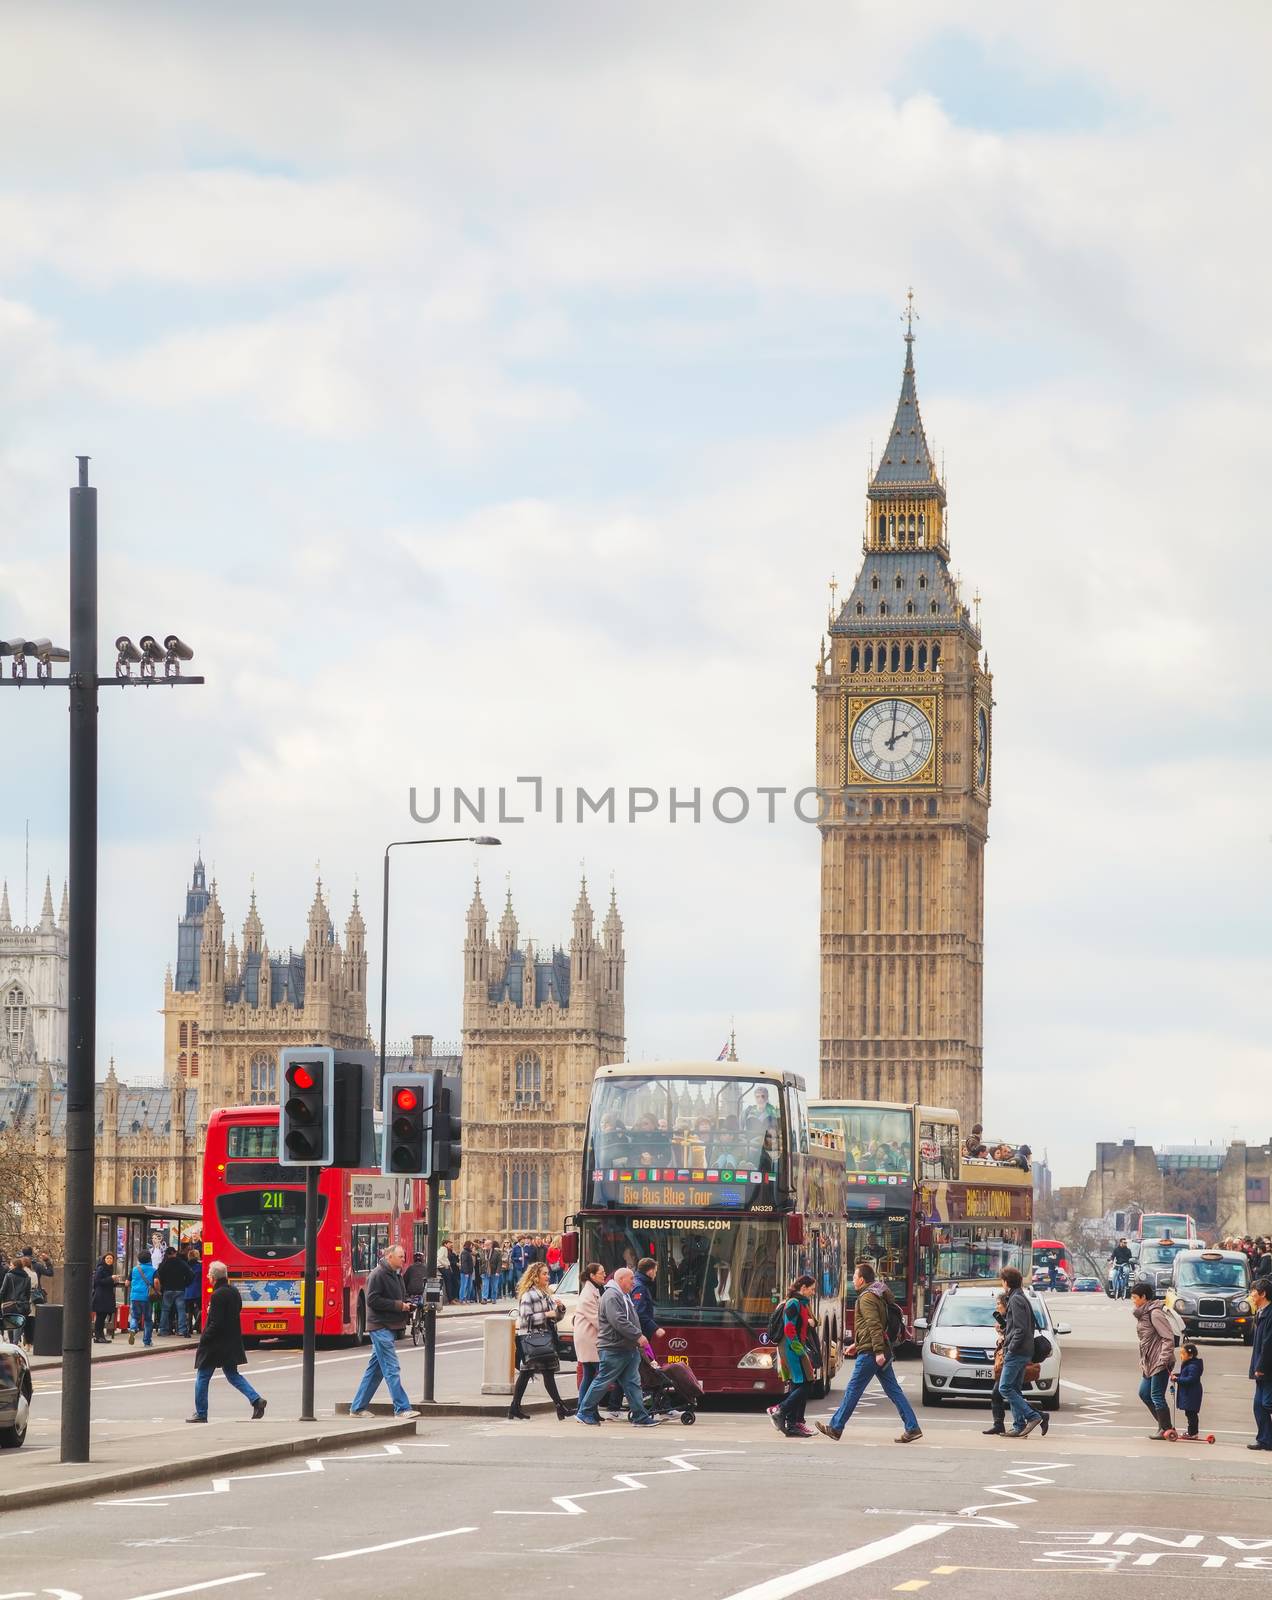 LONDON - APRIL 5: Overview of London with the Elizabeth Tower on April 5, 2015 in London, UK. The tower is officially known as the Elizabeth Tower, renamed as such to celebrate the Jubilee of Elizabeth II.